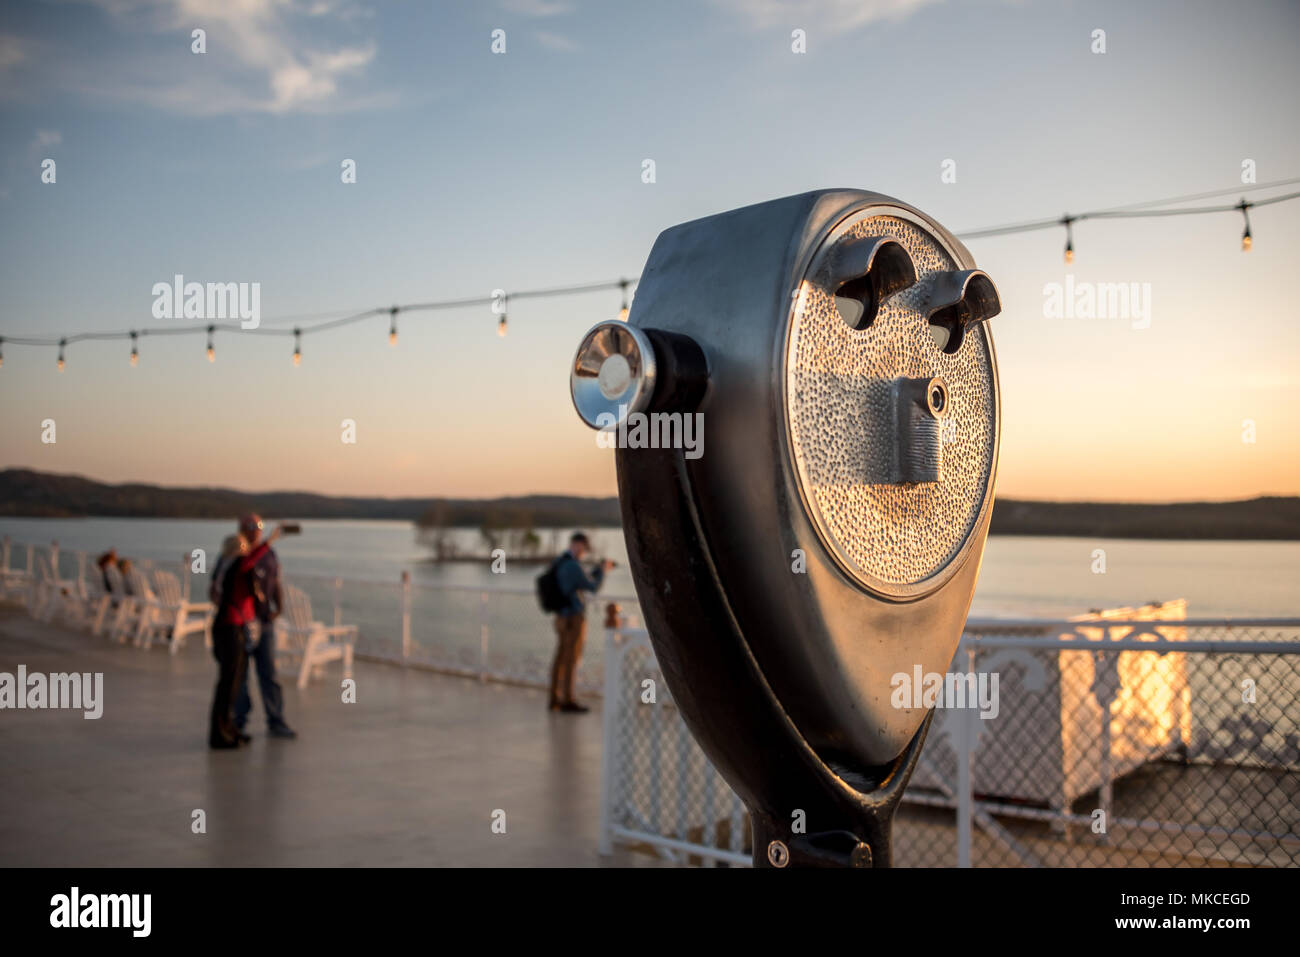 Showboat Branson Belle top deck at sunset, a couple taking a selfie on top deck, old-fashioned viewfinder in foreground, Table Rock Lake background. Stock Photo